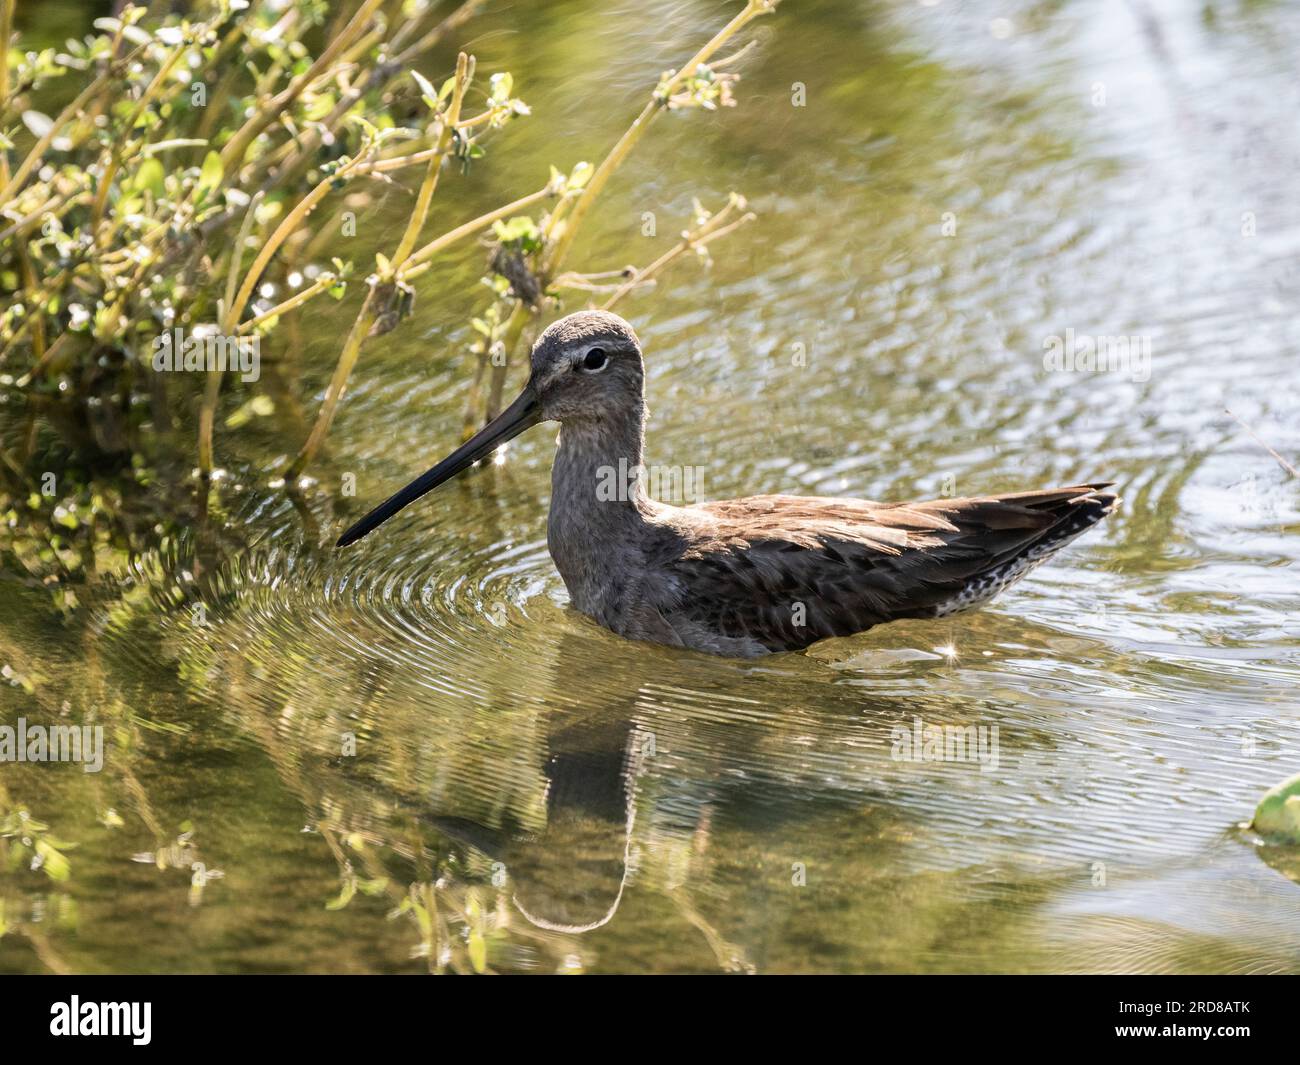 Adult long-billed dowitcher (Limnodromus scolopaceus), in a lagoon near San Jose del Cabo, Baja California Sur, Mexico, North America Stock Photo